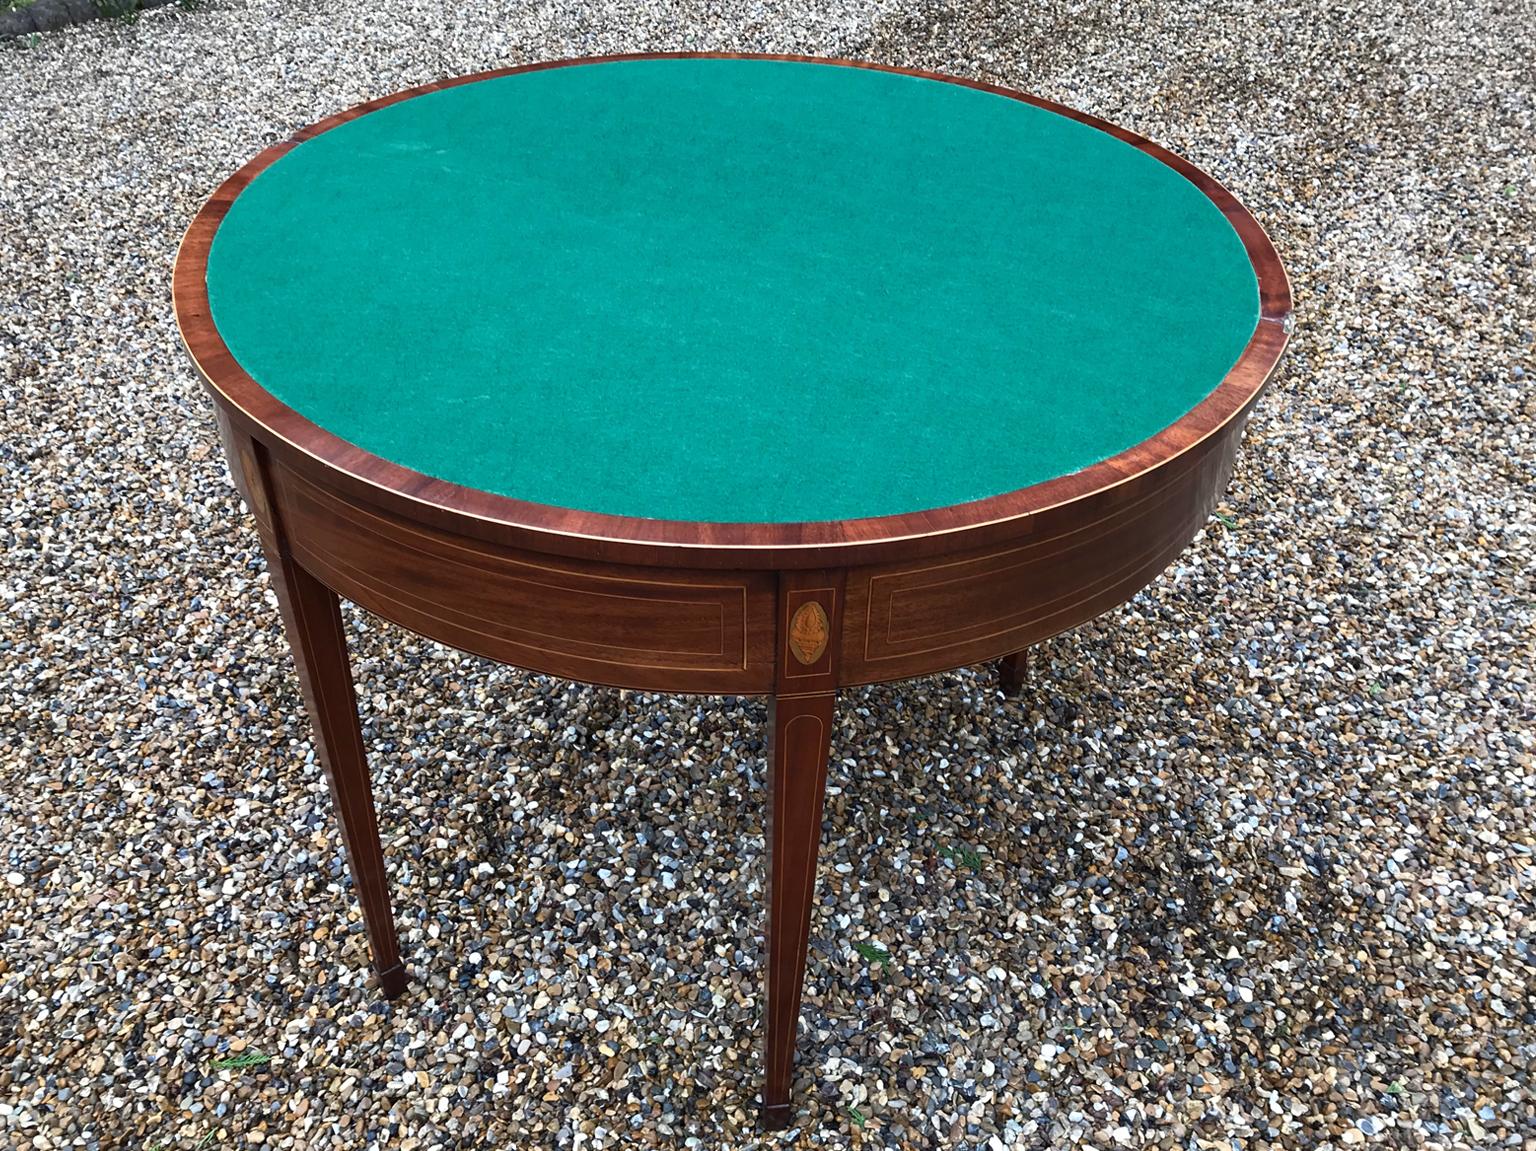 19th Century Mahogany Demilune Card Table In Good Condition For Sale In Richmond, London, Surrey